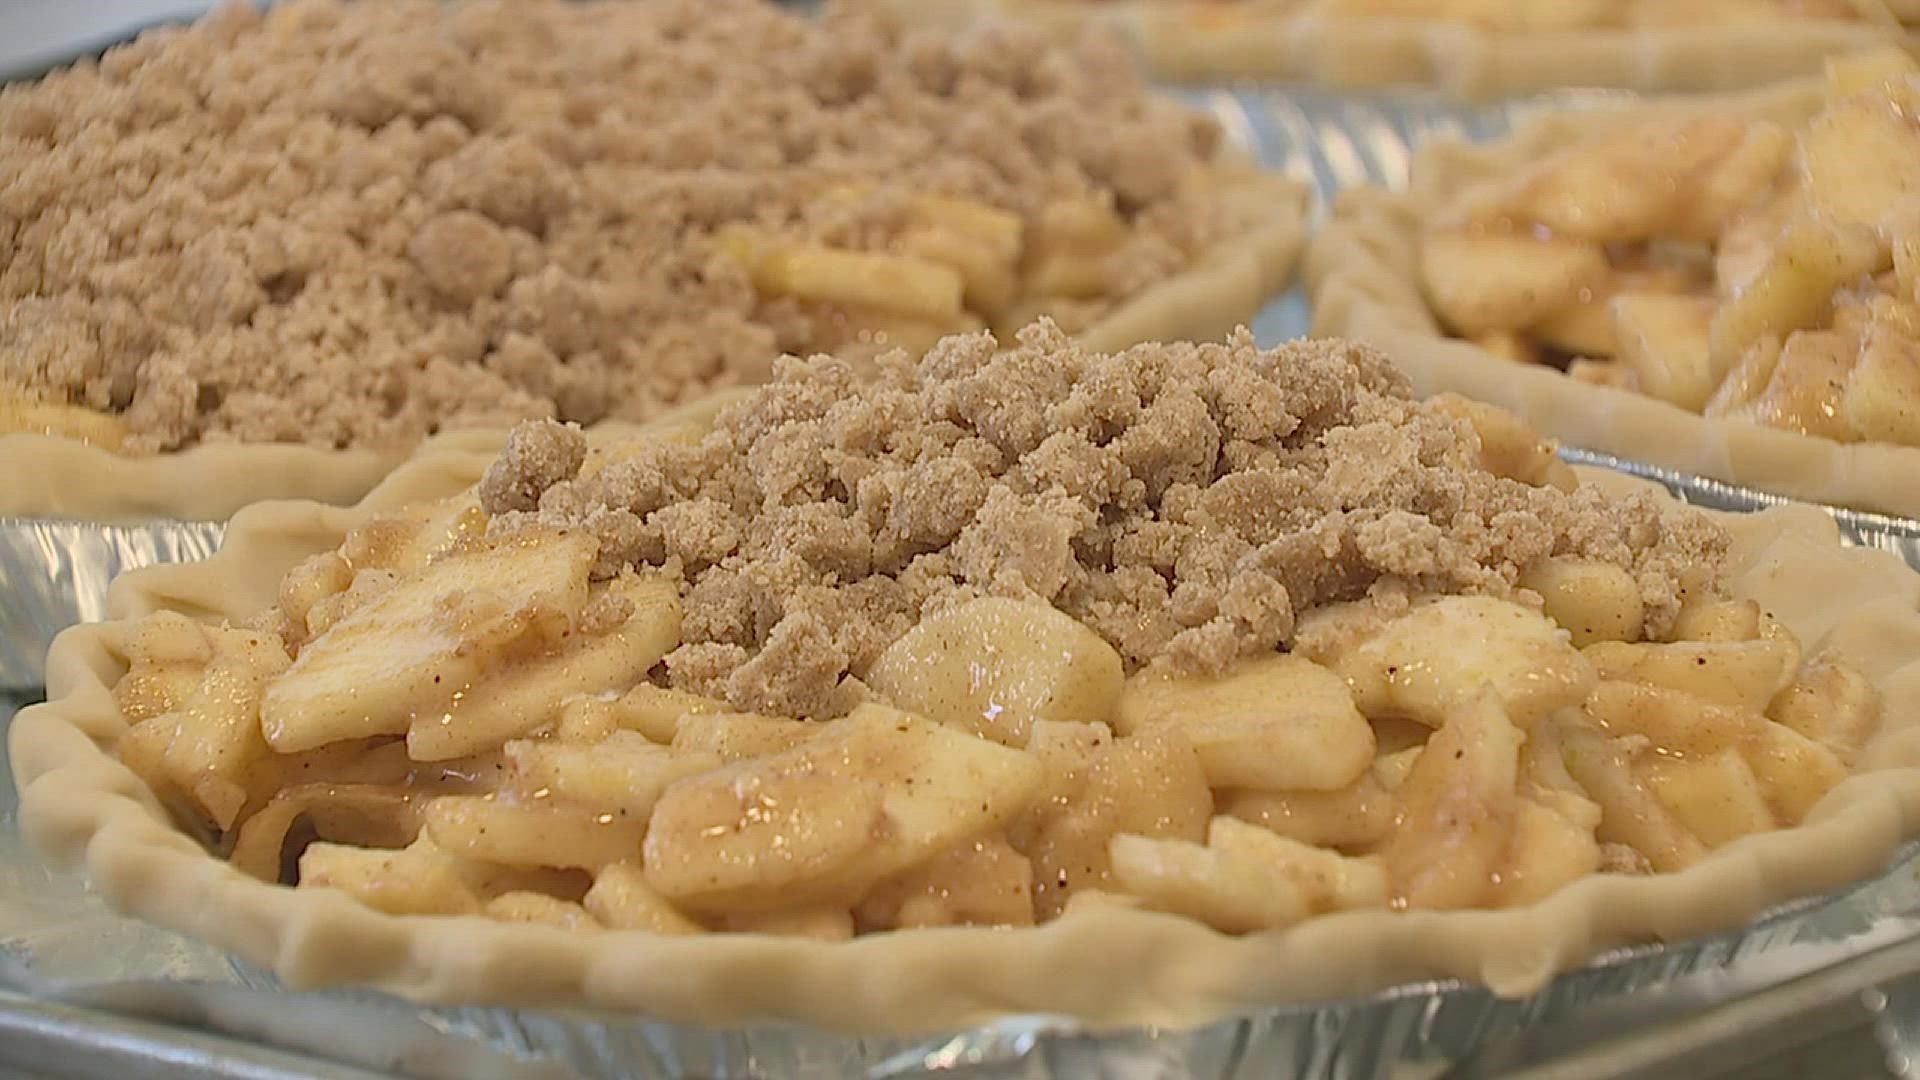 With Thanksgiving just days away, this Bettendorf bakery is busy preparing that final bite of your dinner, baking nearly 600 pre-ordered pies.